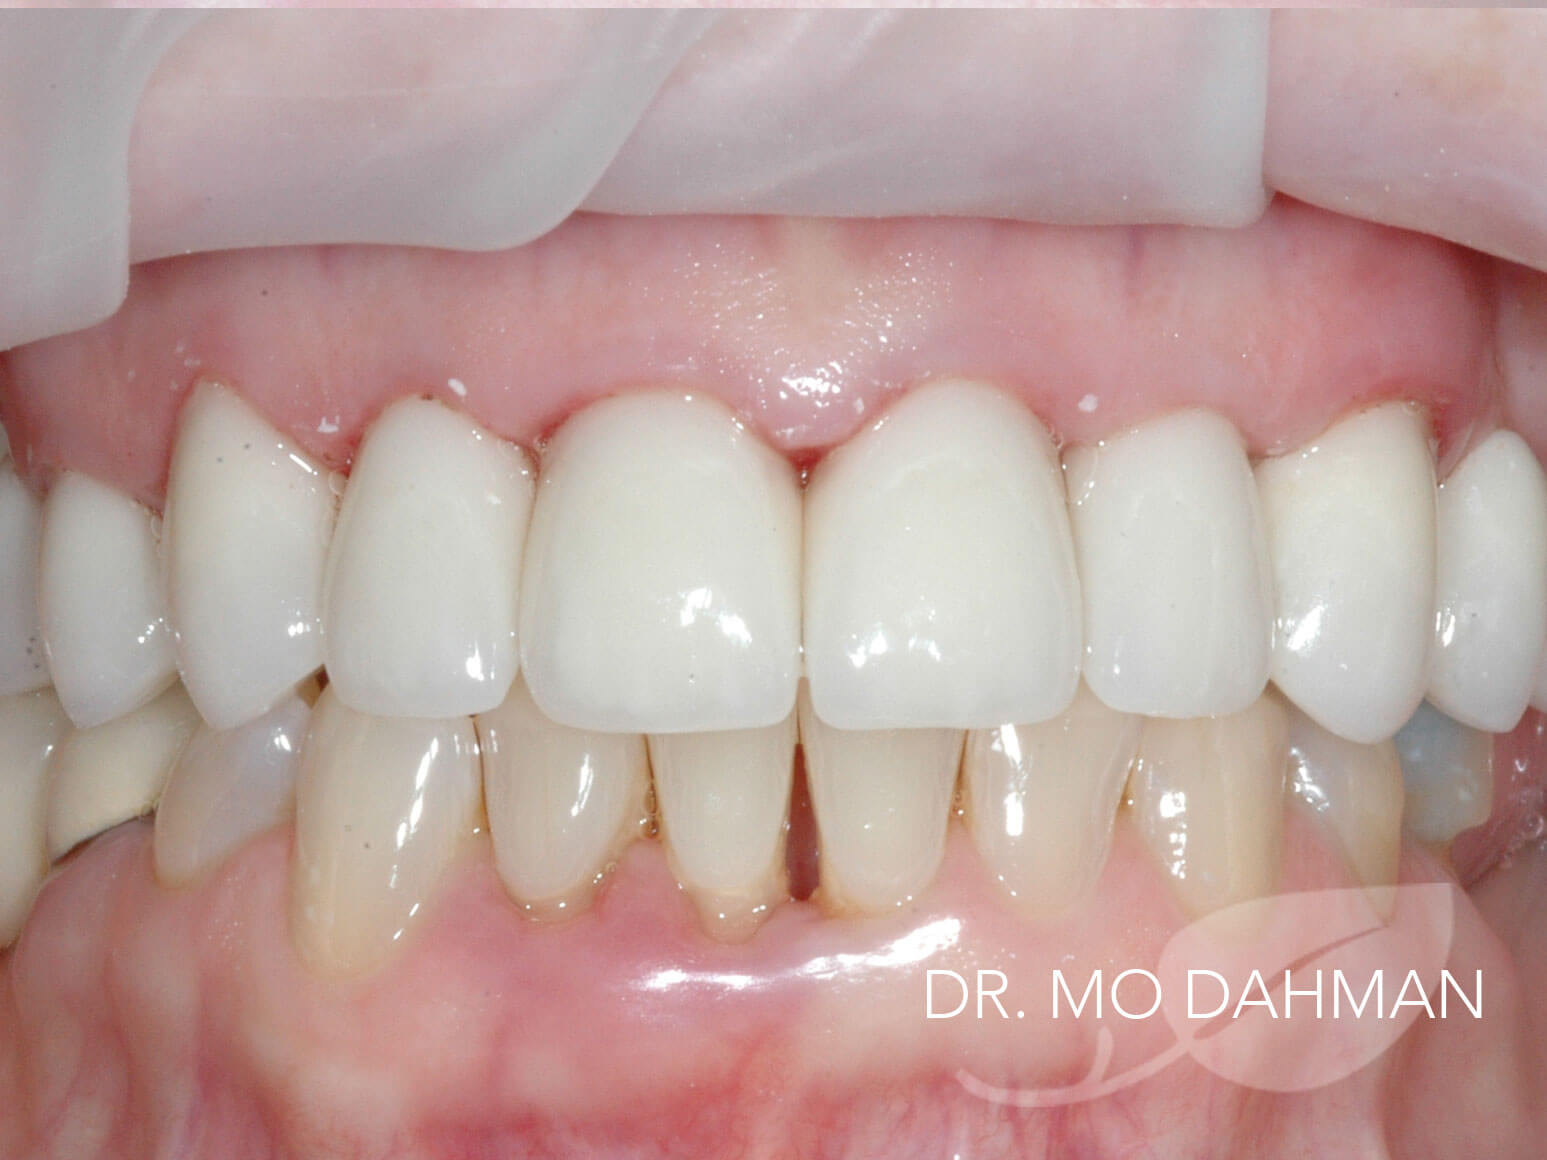 Case 06 retracted smiling after treatment